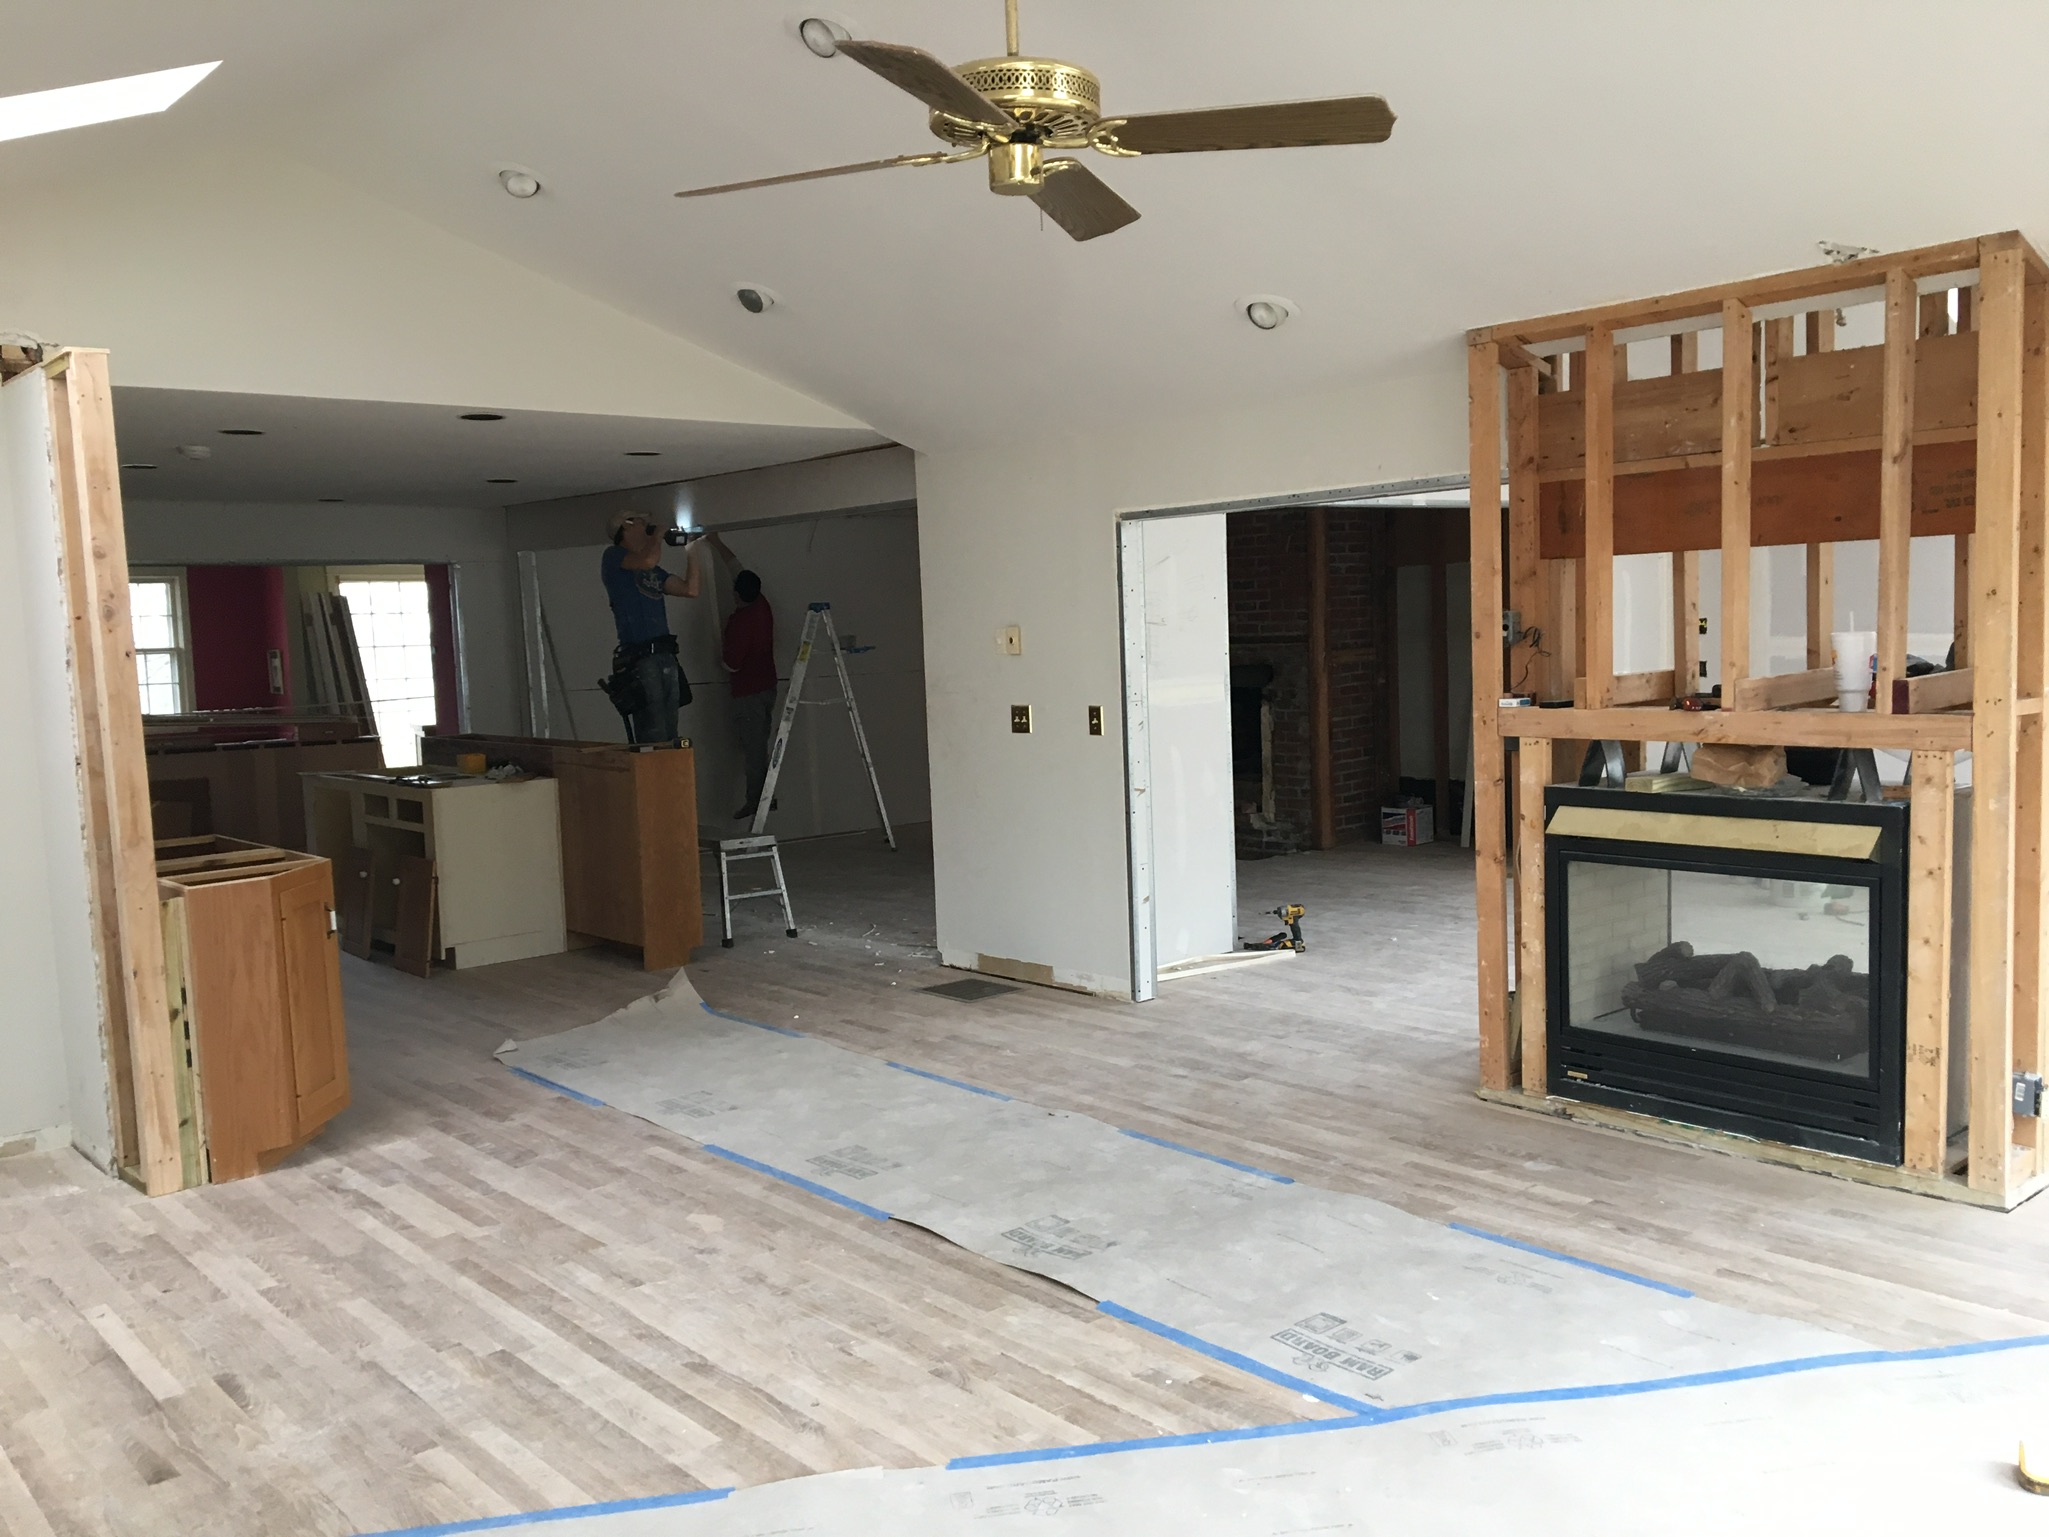  progress shot - the floor plan is coming to life! walls down and things have been opened up. 